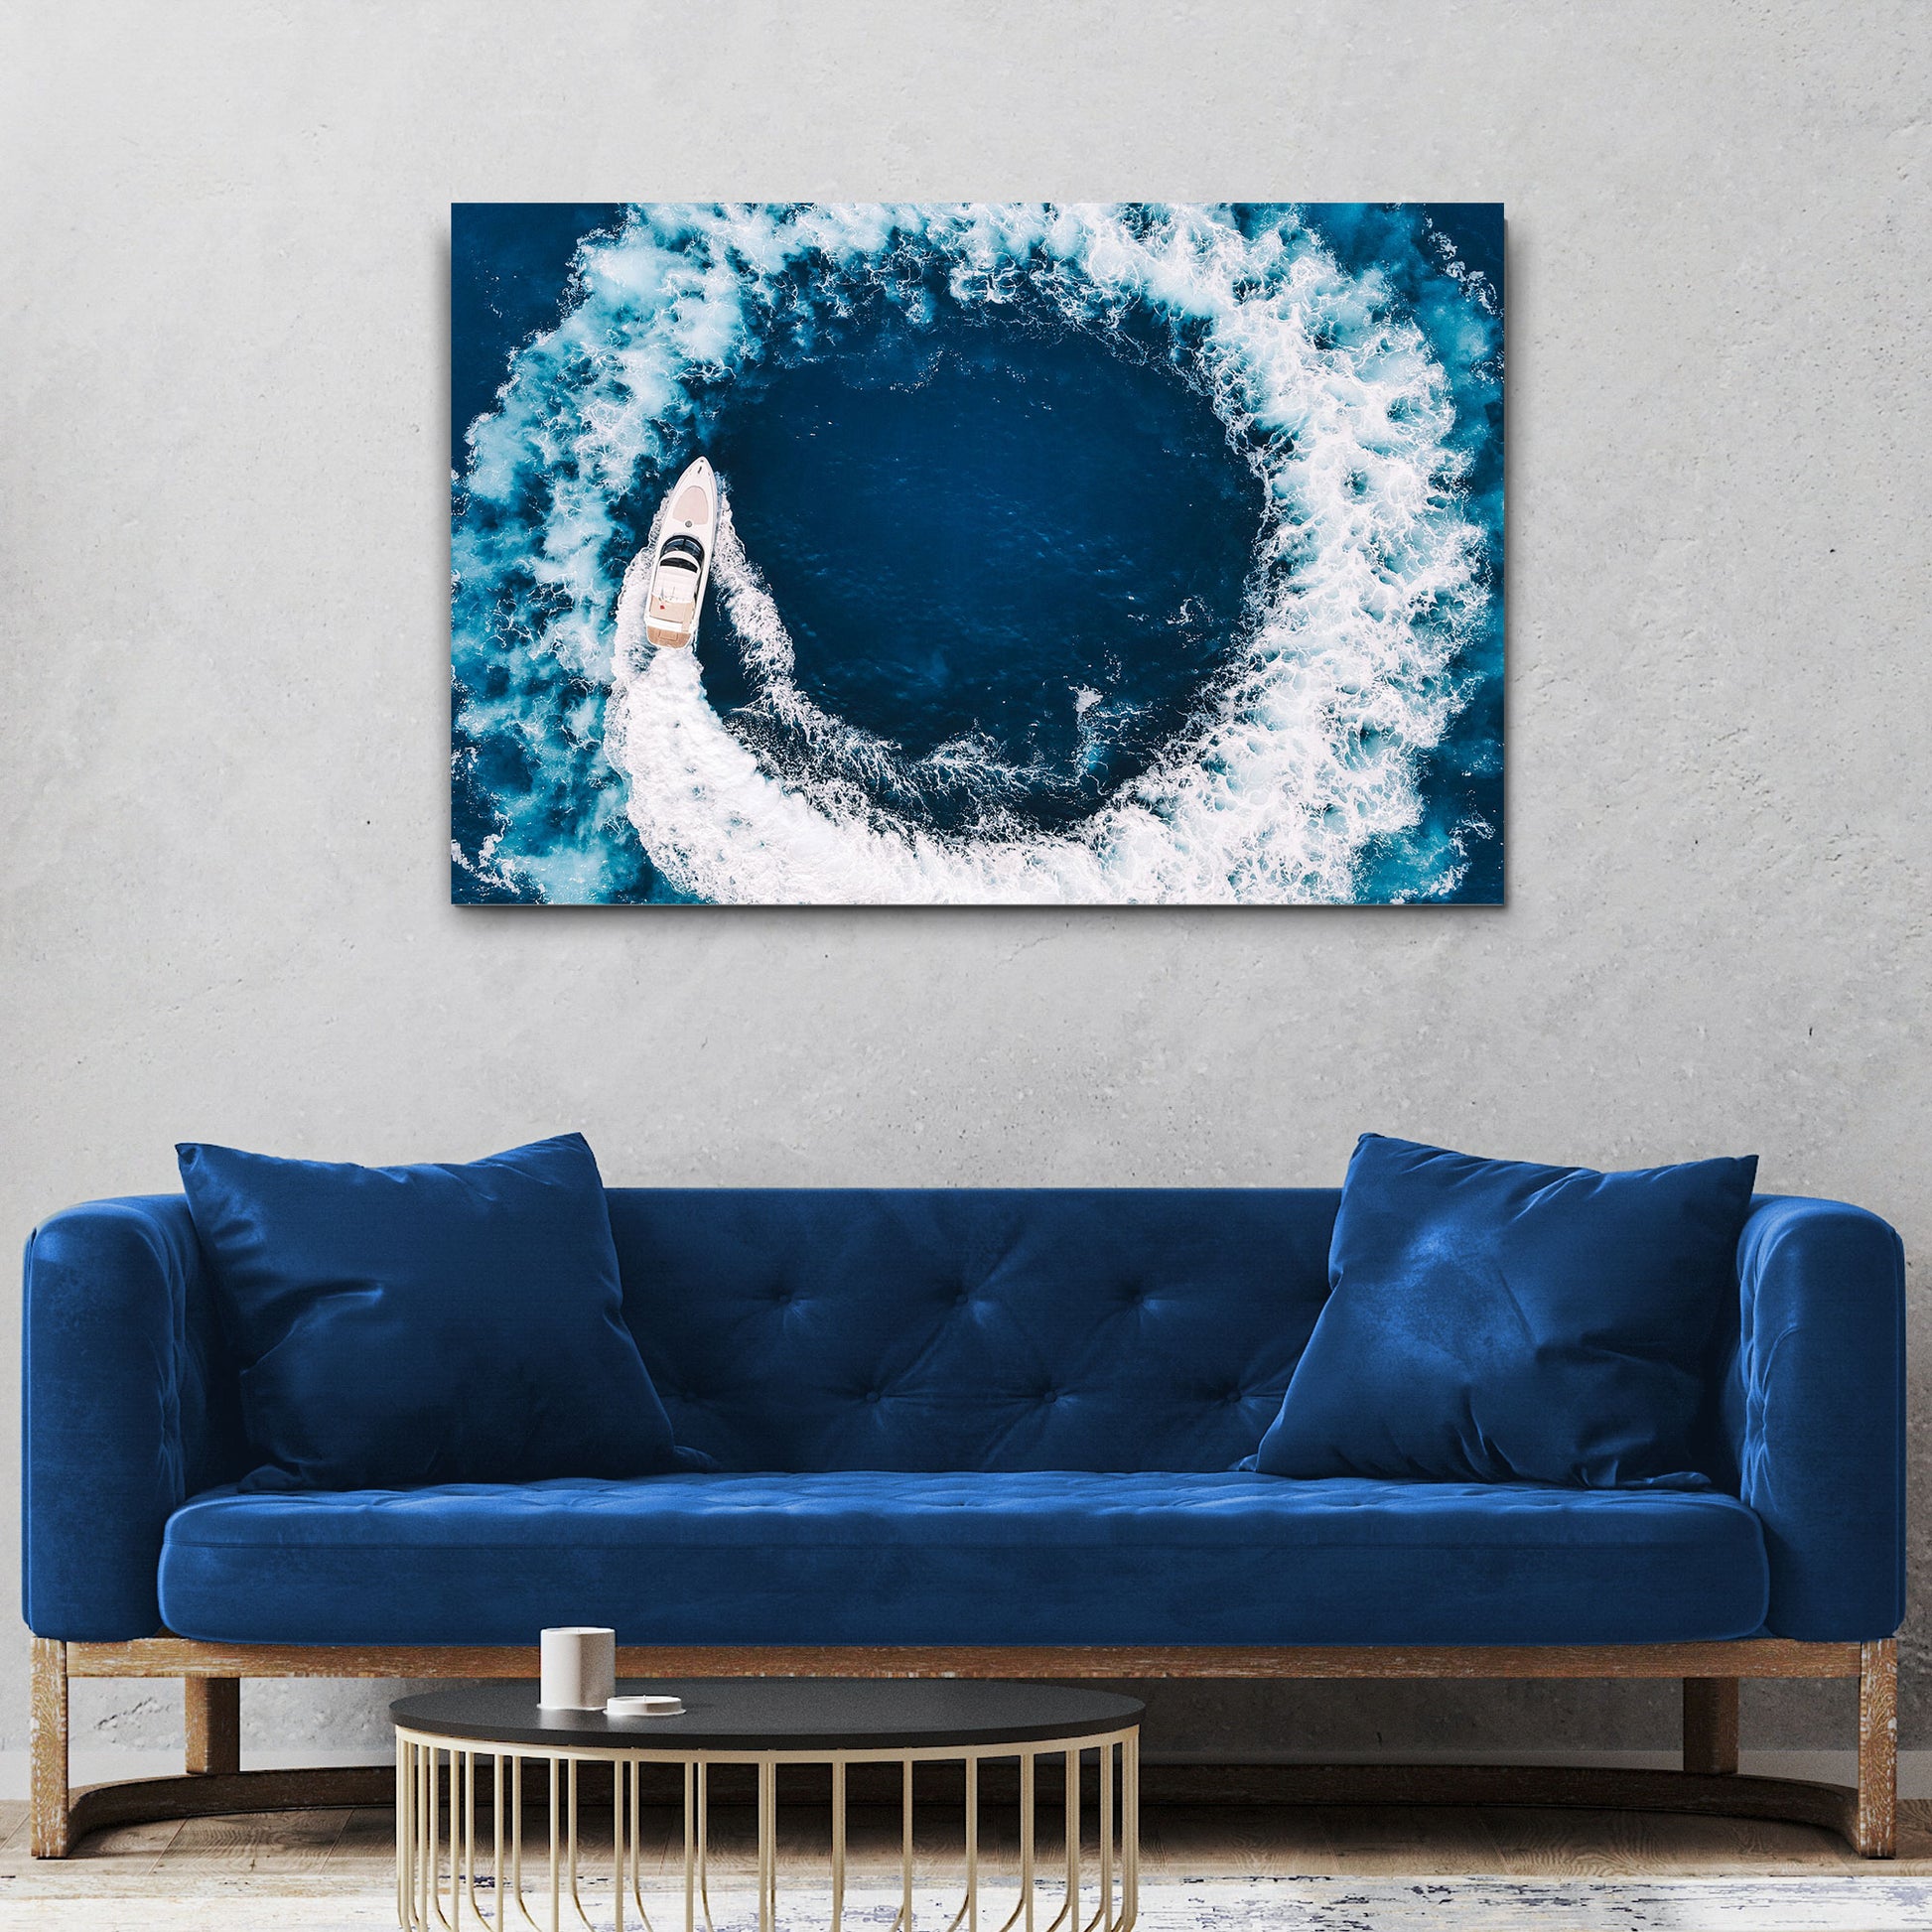 Boat Yacht In The Ocean Canvas Wall Art - Image by Tailored Canvases